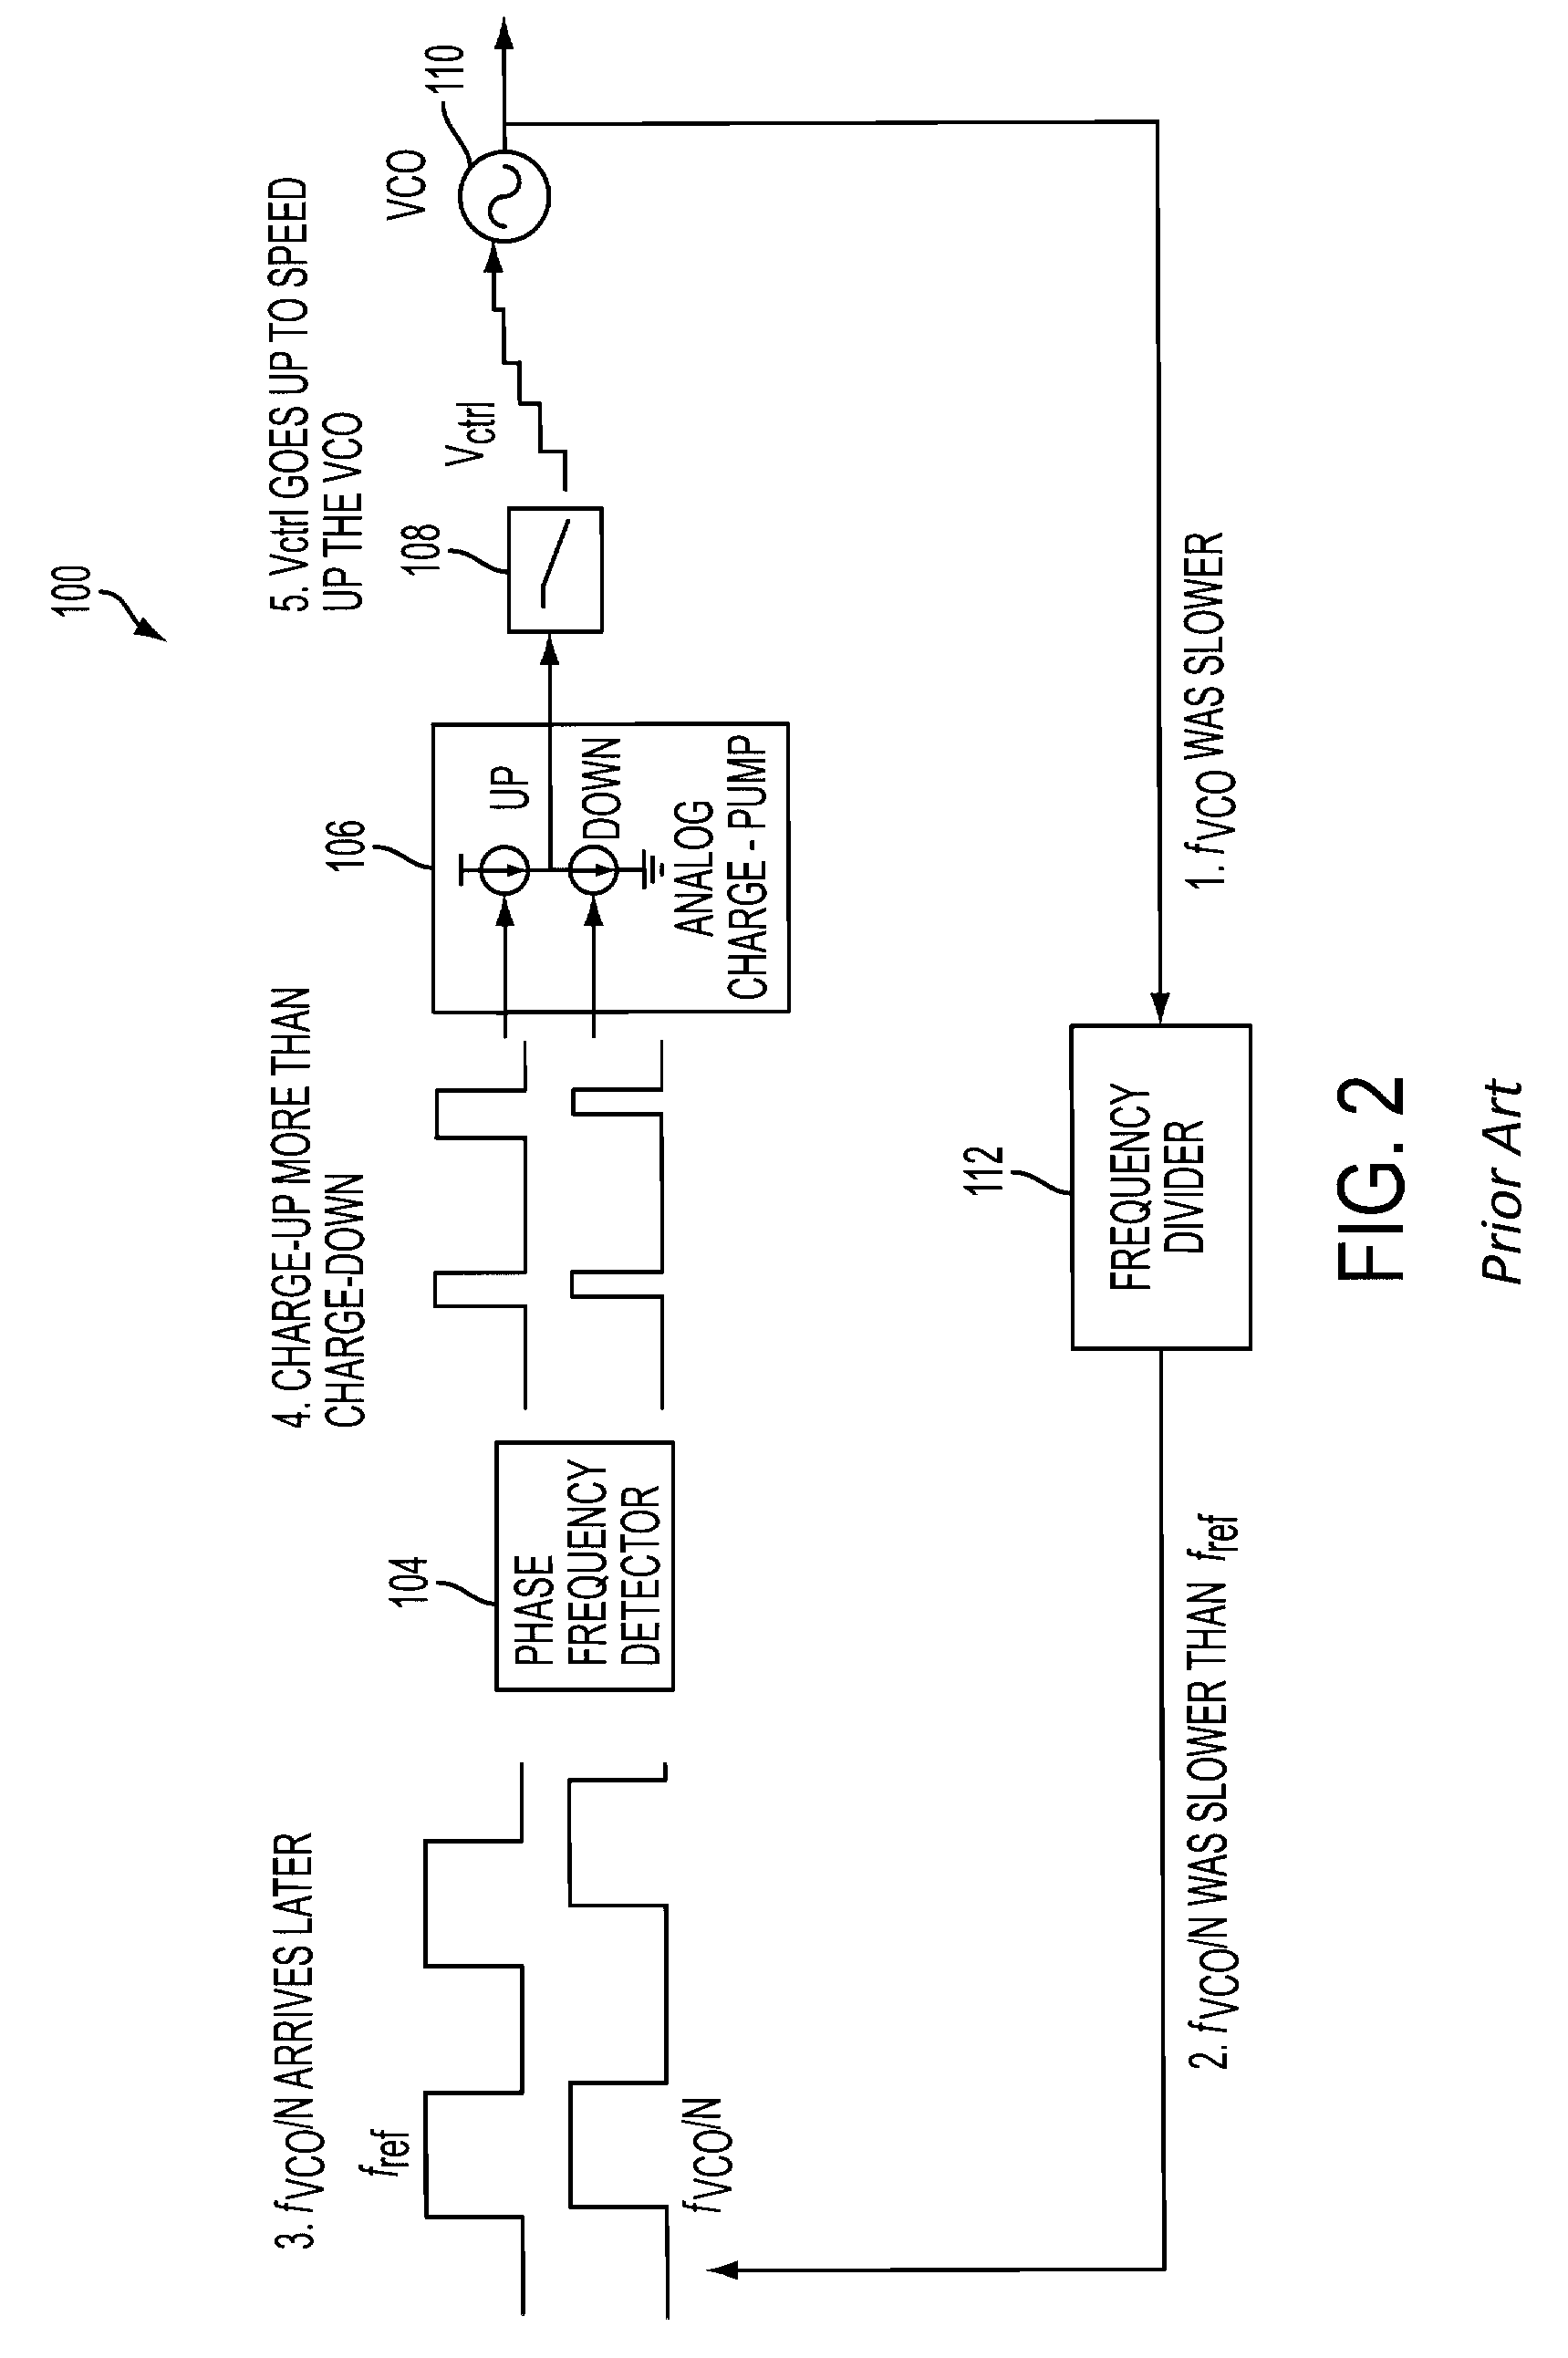 Digital phase-locked loop circuit including a phase delay quantizer and method of use